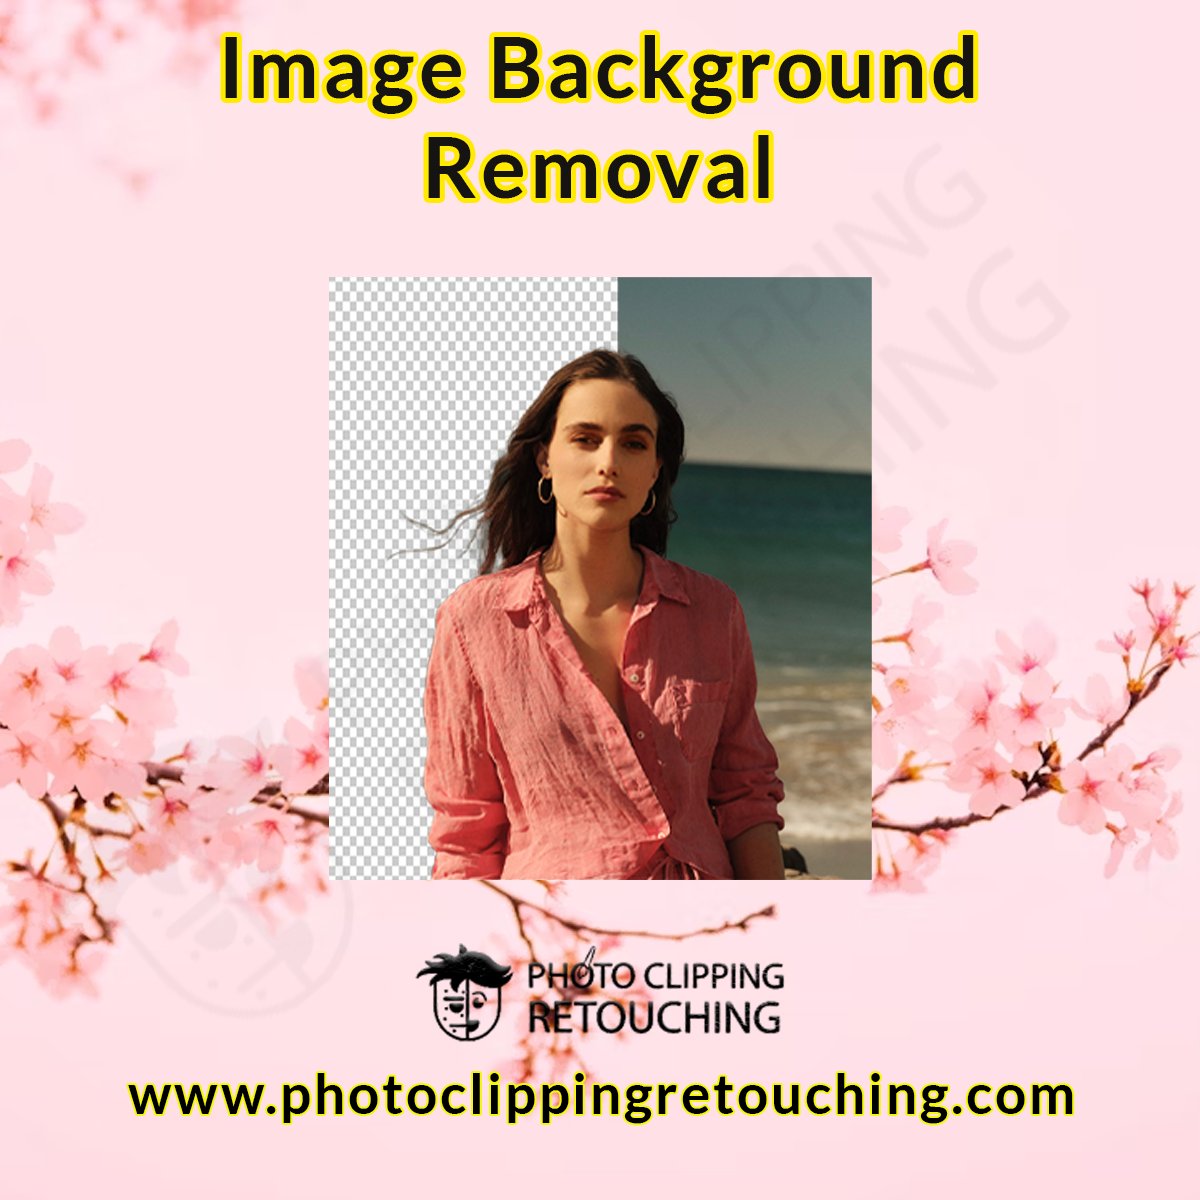 Make your product photos shine with our Image Background Removal Service! #BackgroundRemoval #ClutterFree #CleanBackground #VisualContent #PhotoEditing #EditingServices #GraphicDesign #teamPCR Email: info@photoclippingretouching.com Link: photoclippingretouching.com/image-backgrou…